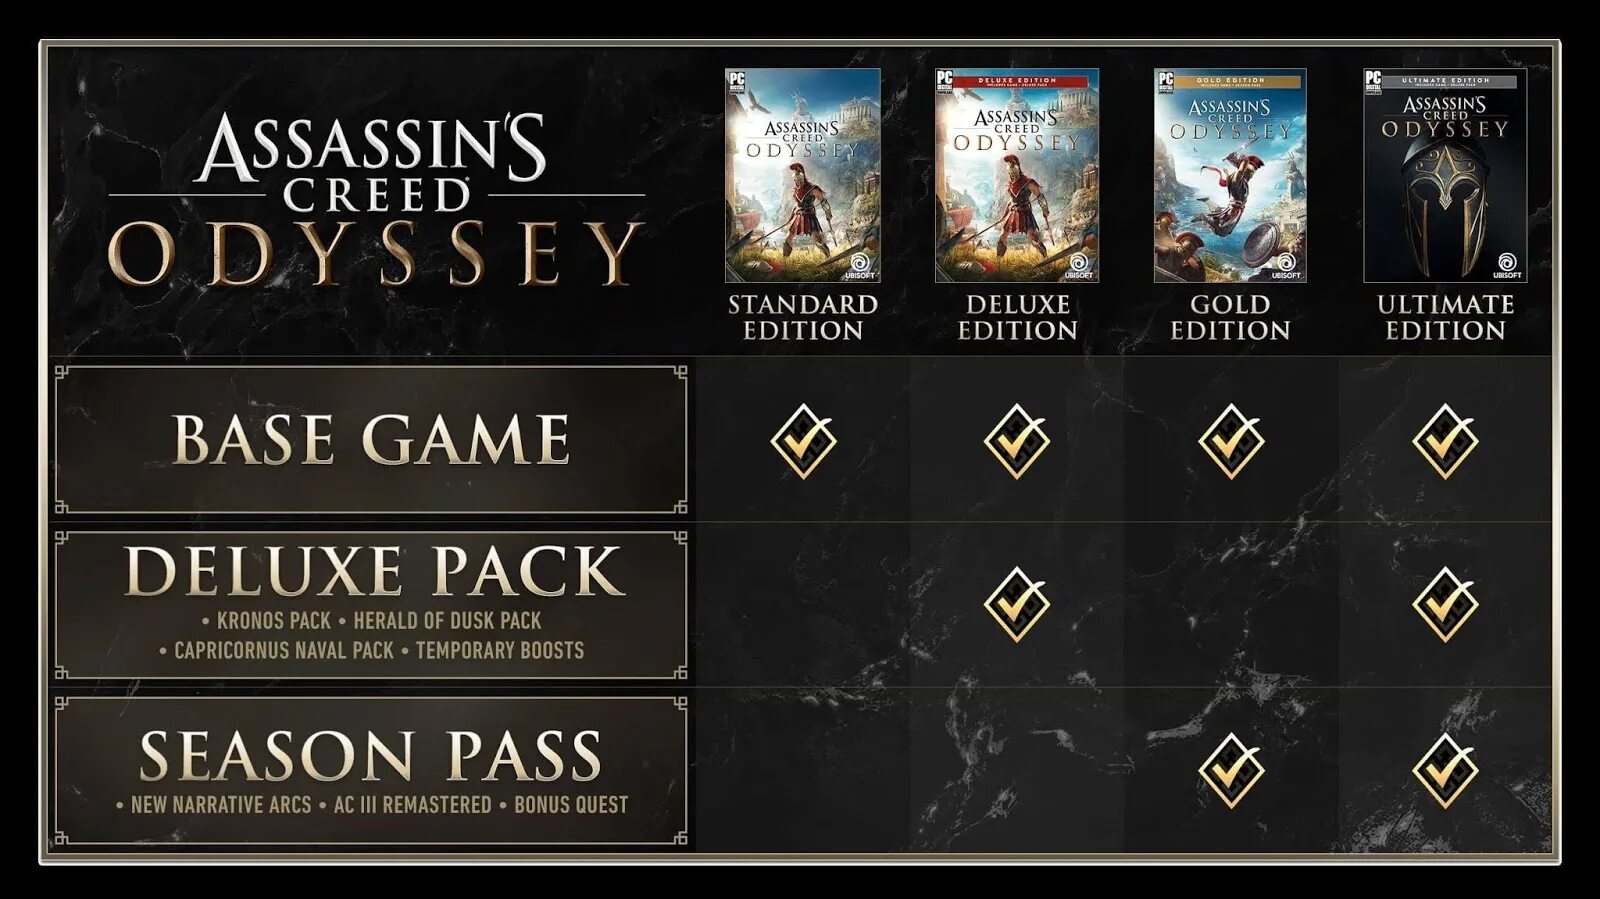 Assassin s creed odyssey editions. Assassin's Creed® Odyssey - Gold Edition. Odyssey ps4 Gold Edition. Assassin's Creed Odyssey Ultimate Edition Xbox. Assassin's Creed Odyssey ps4.